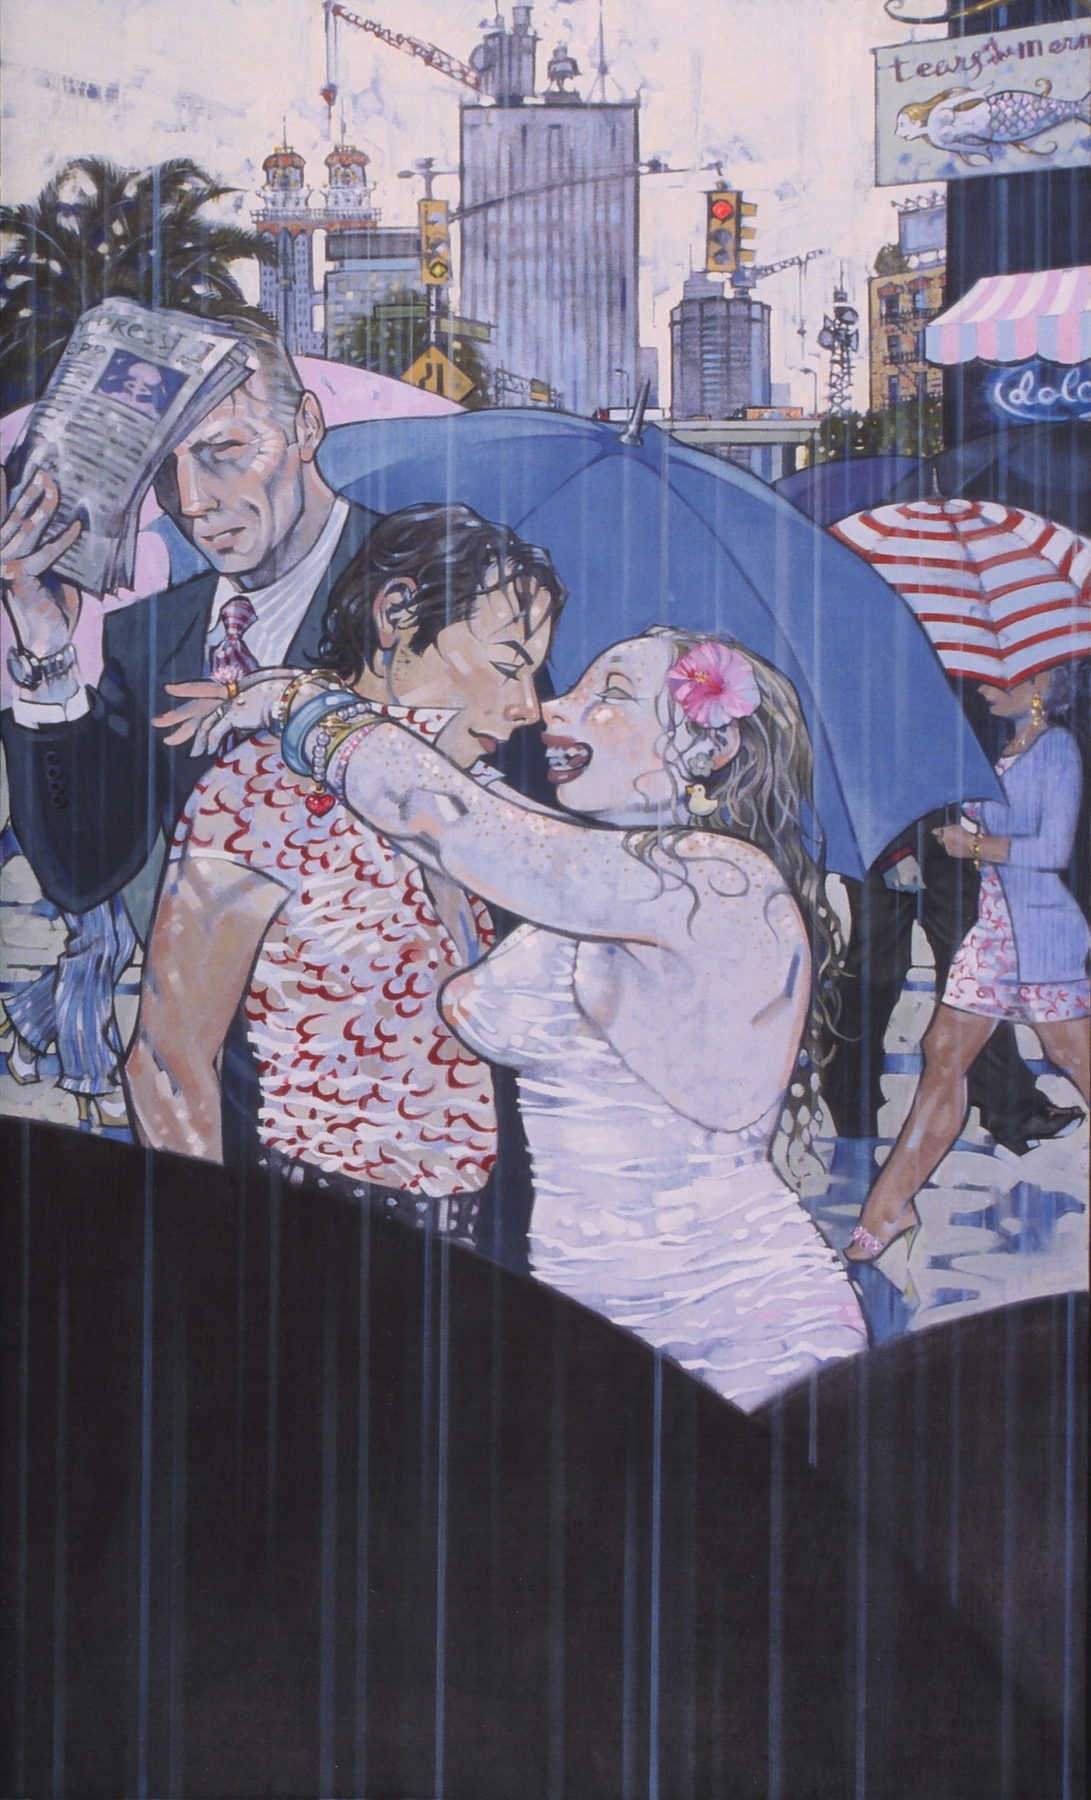 Kiss, 2002, oil on canvas, 68.5 x 40.5 inches, by Taiyo la Paix